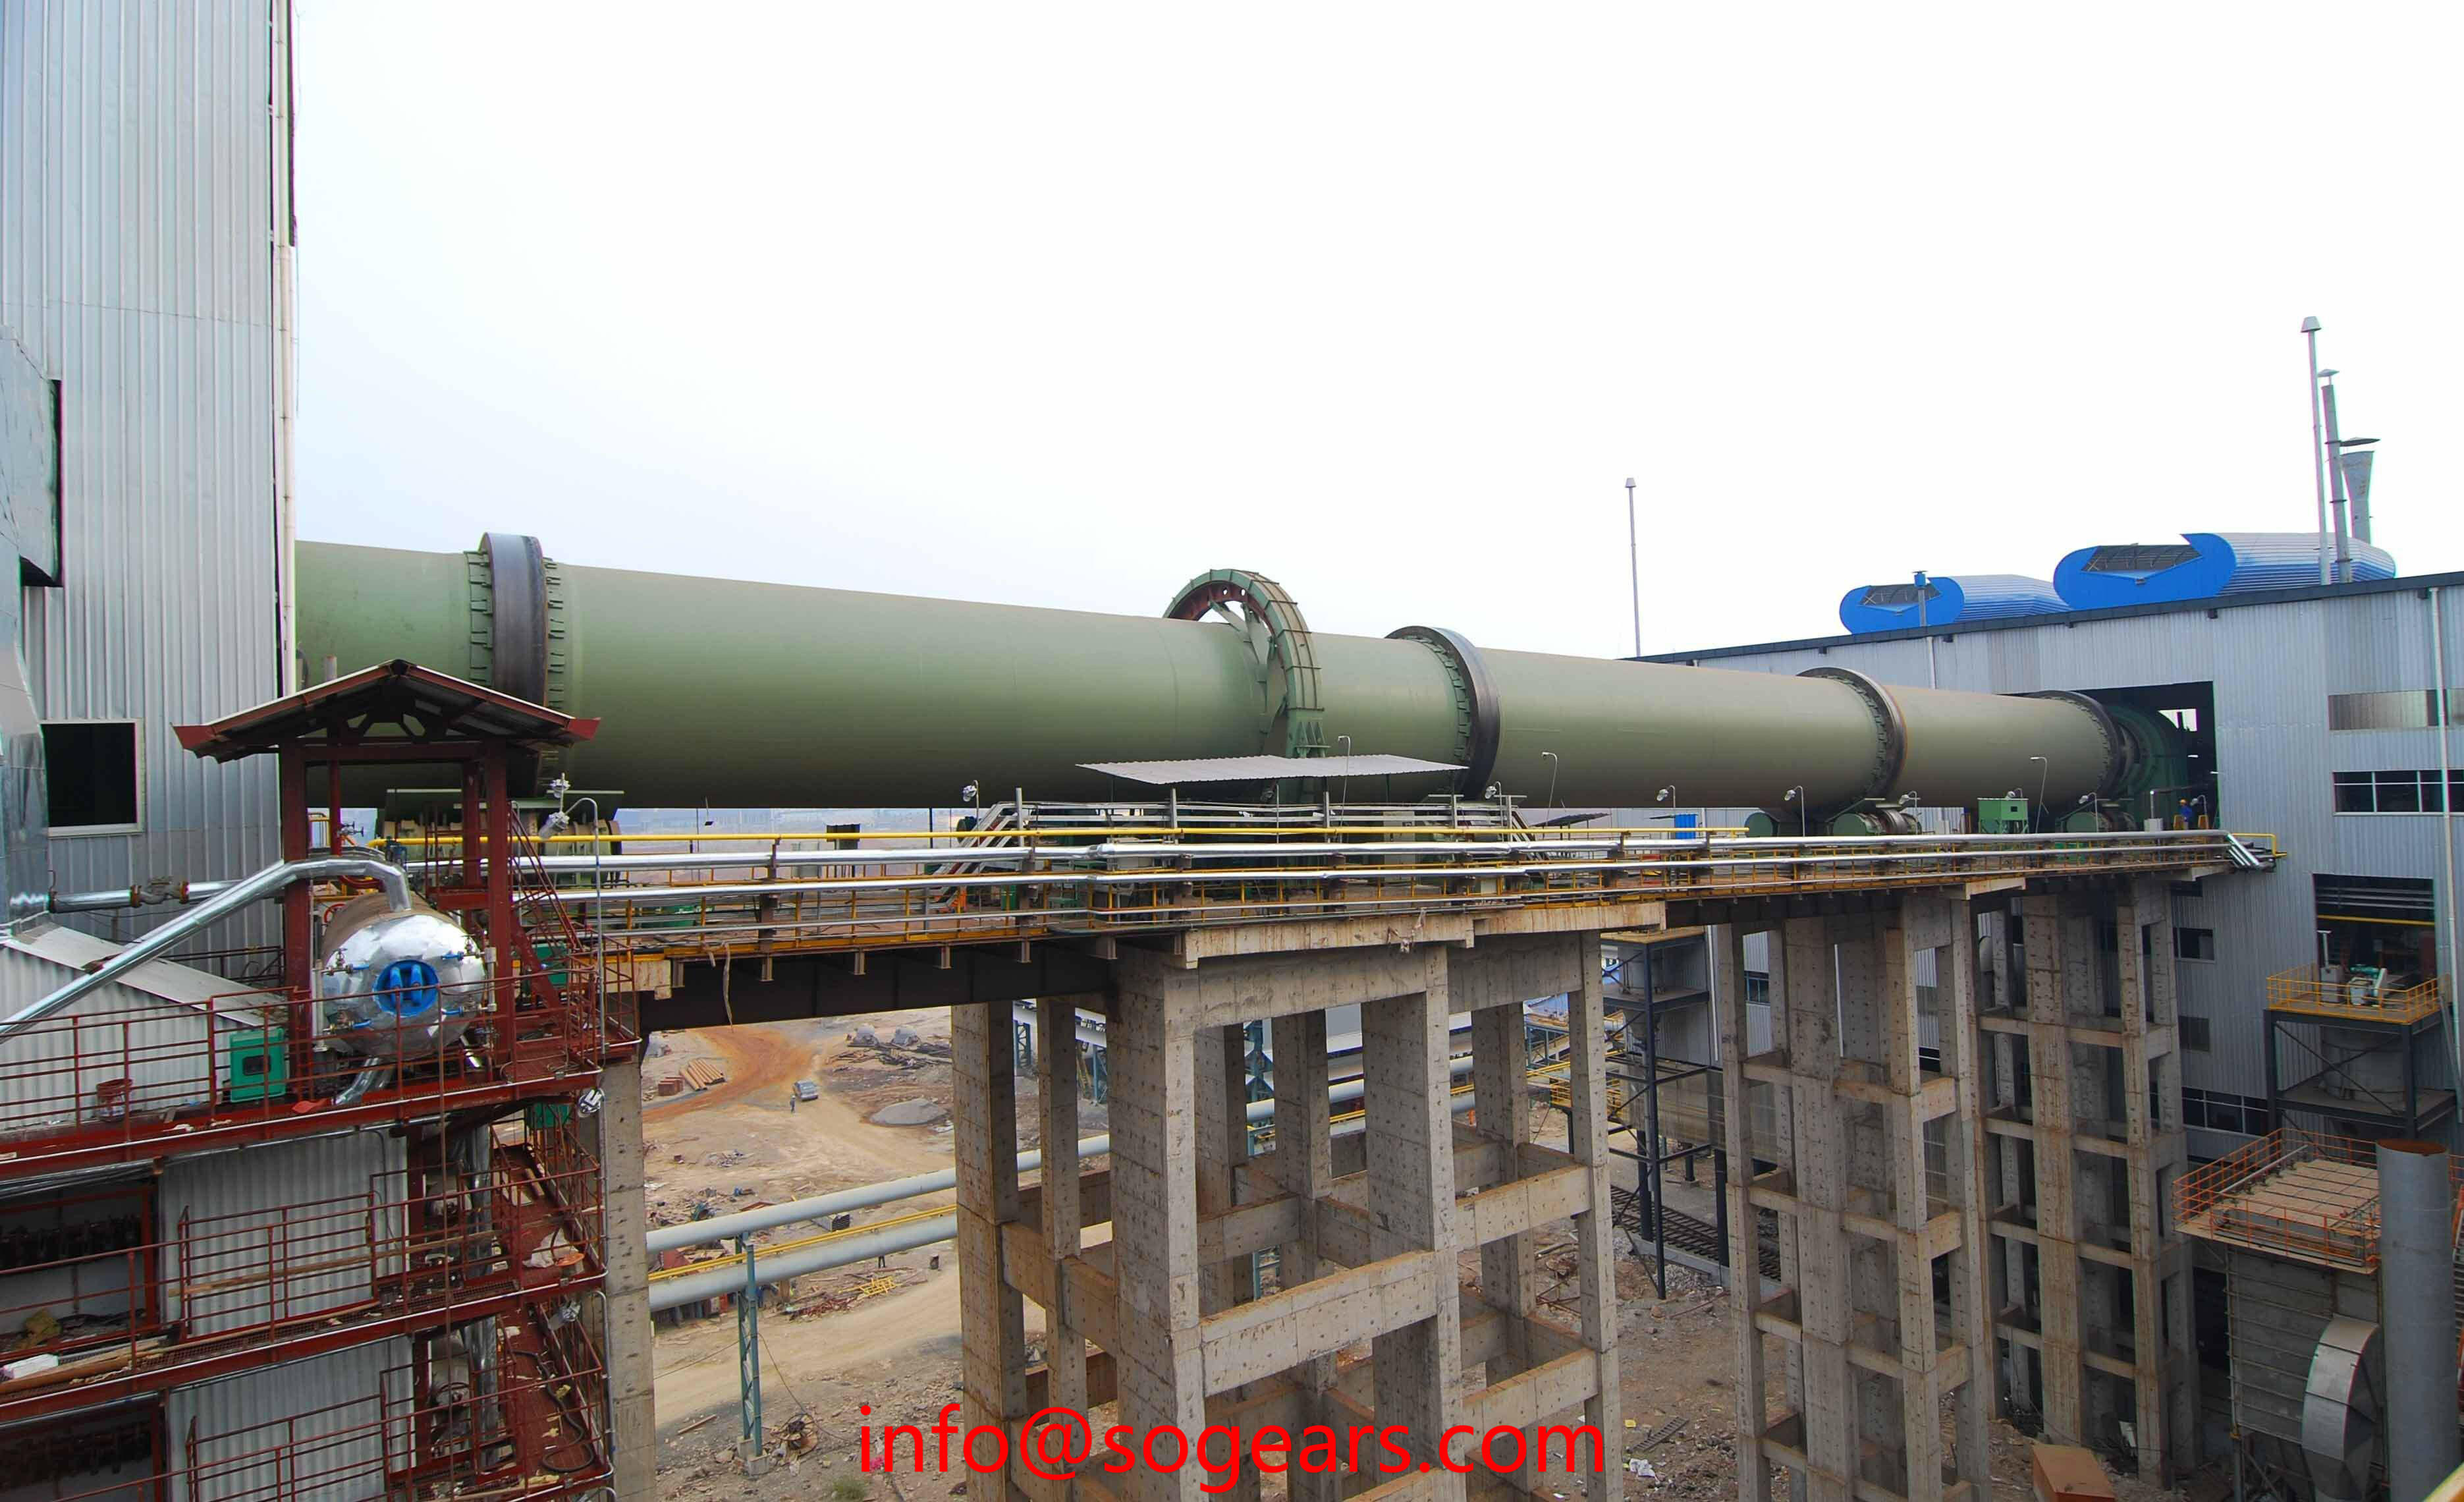 Ball mill gearbox manufacturers in china